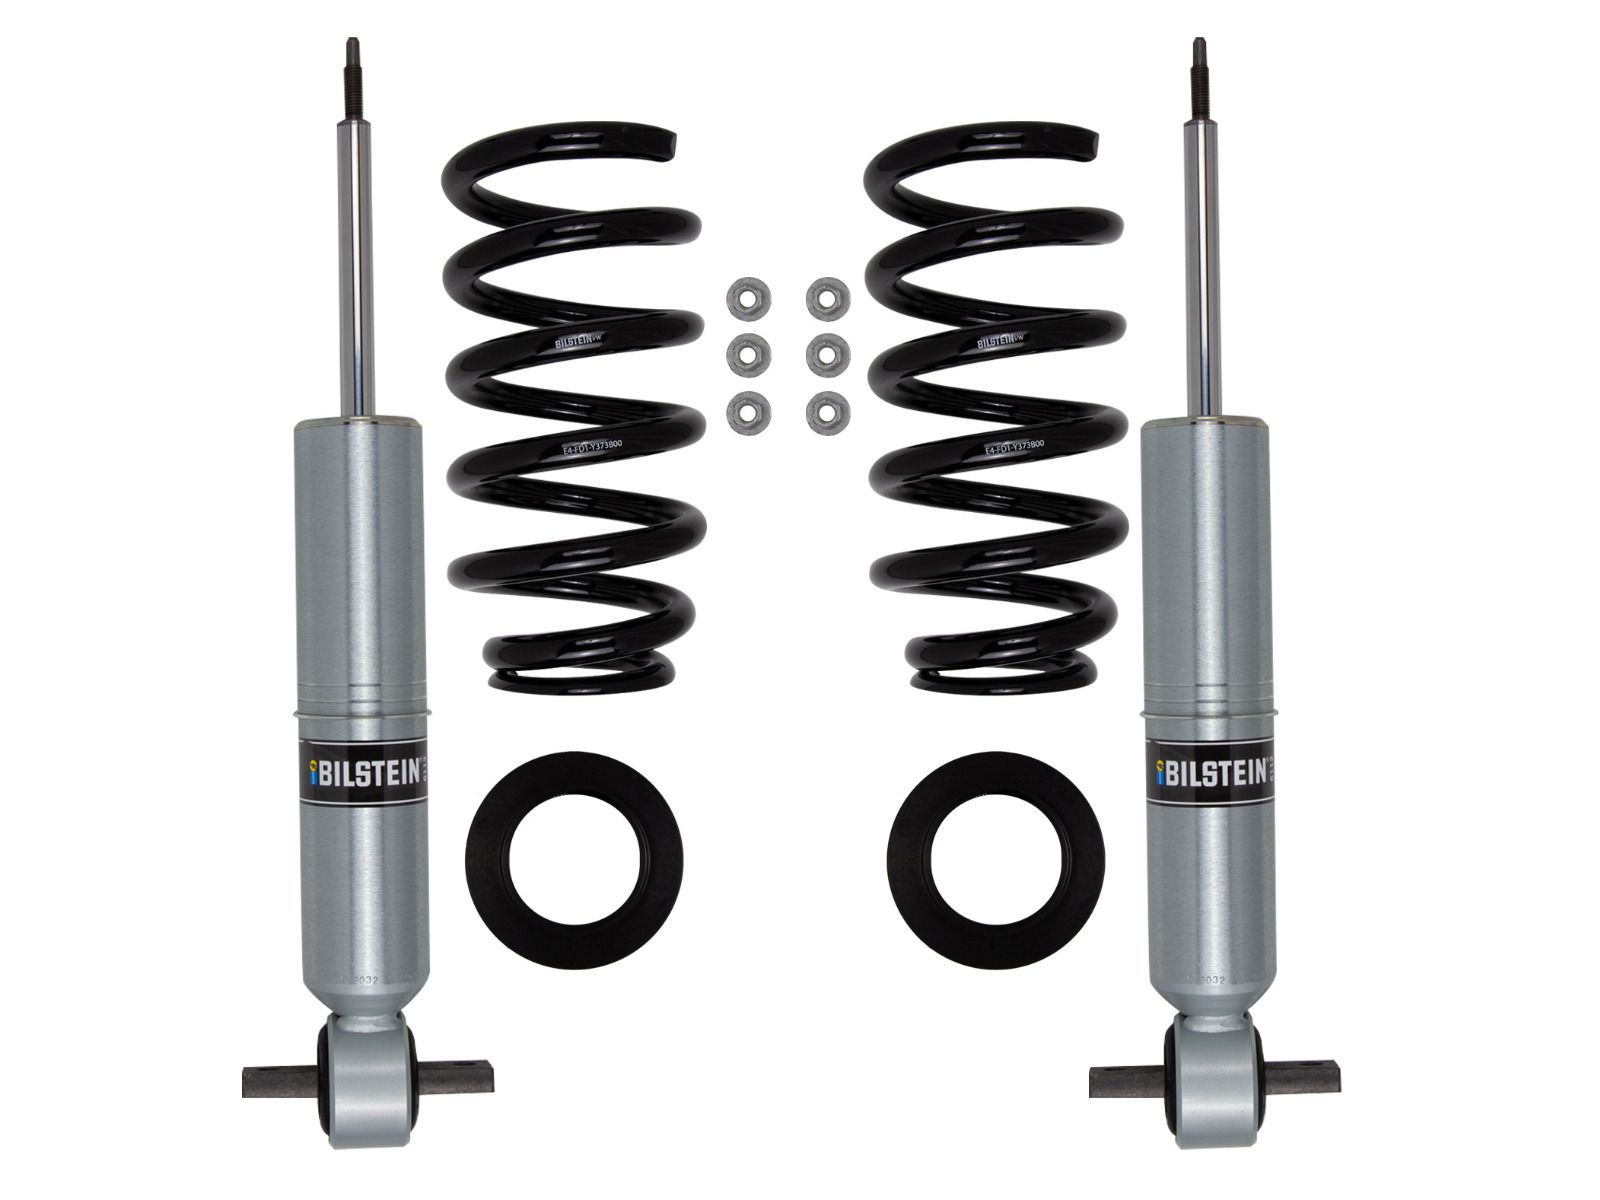 Sierra 1500 2014-2018 GMC 4WD - Bilstein FRONT 6112 Series Coil-Over Kit (Adjustable Height 1.85"- 2.75" Front Lift)